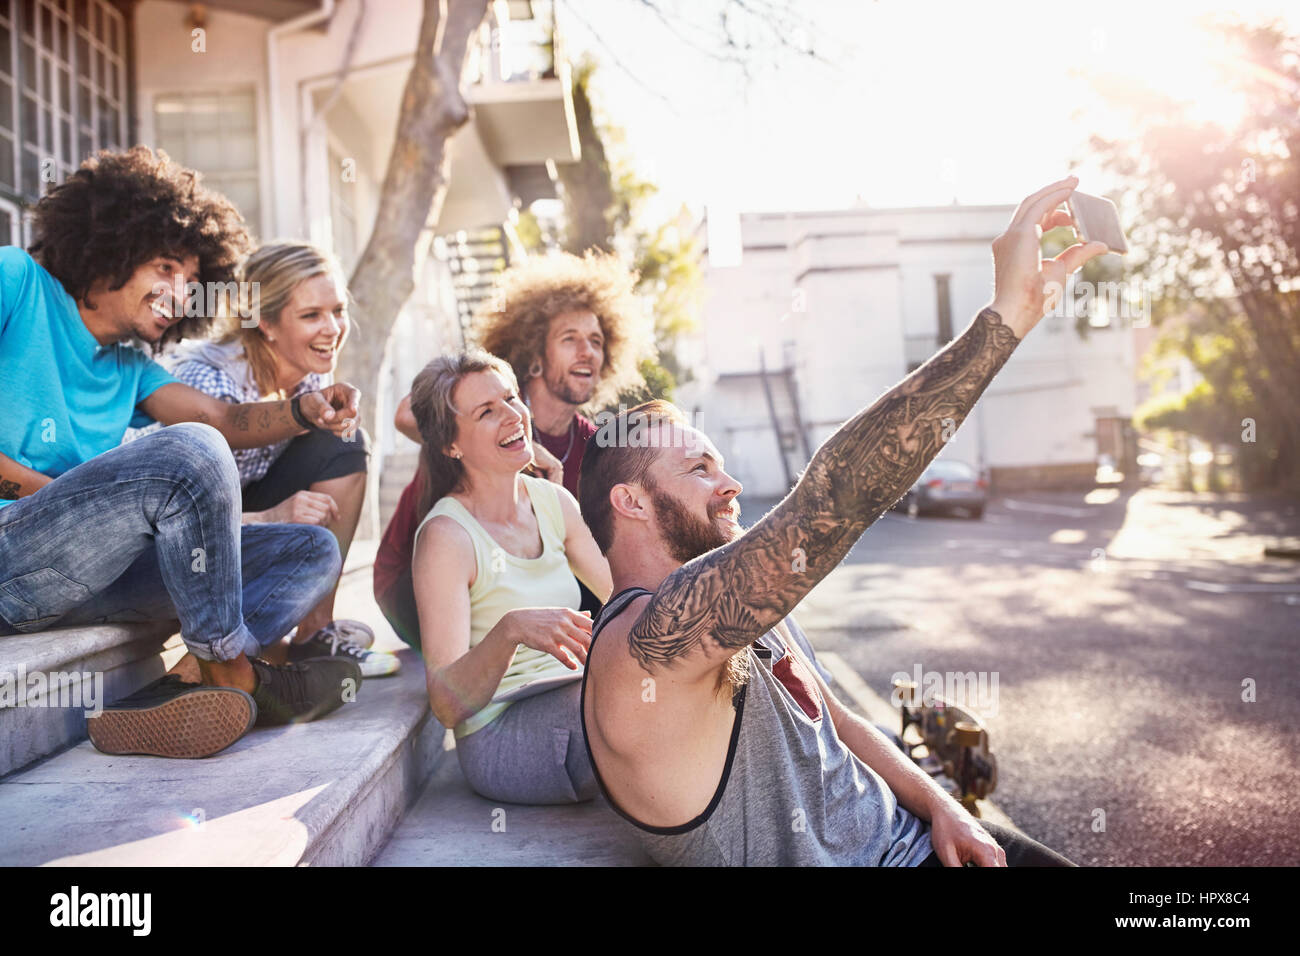 Friends hanging out taking selfie with camera phone on steps Stock Photo